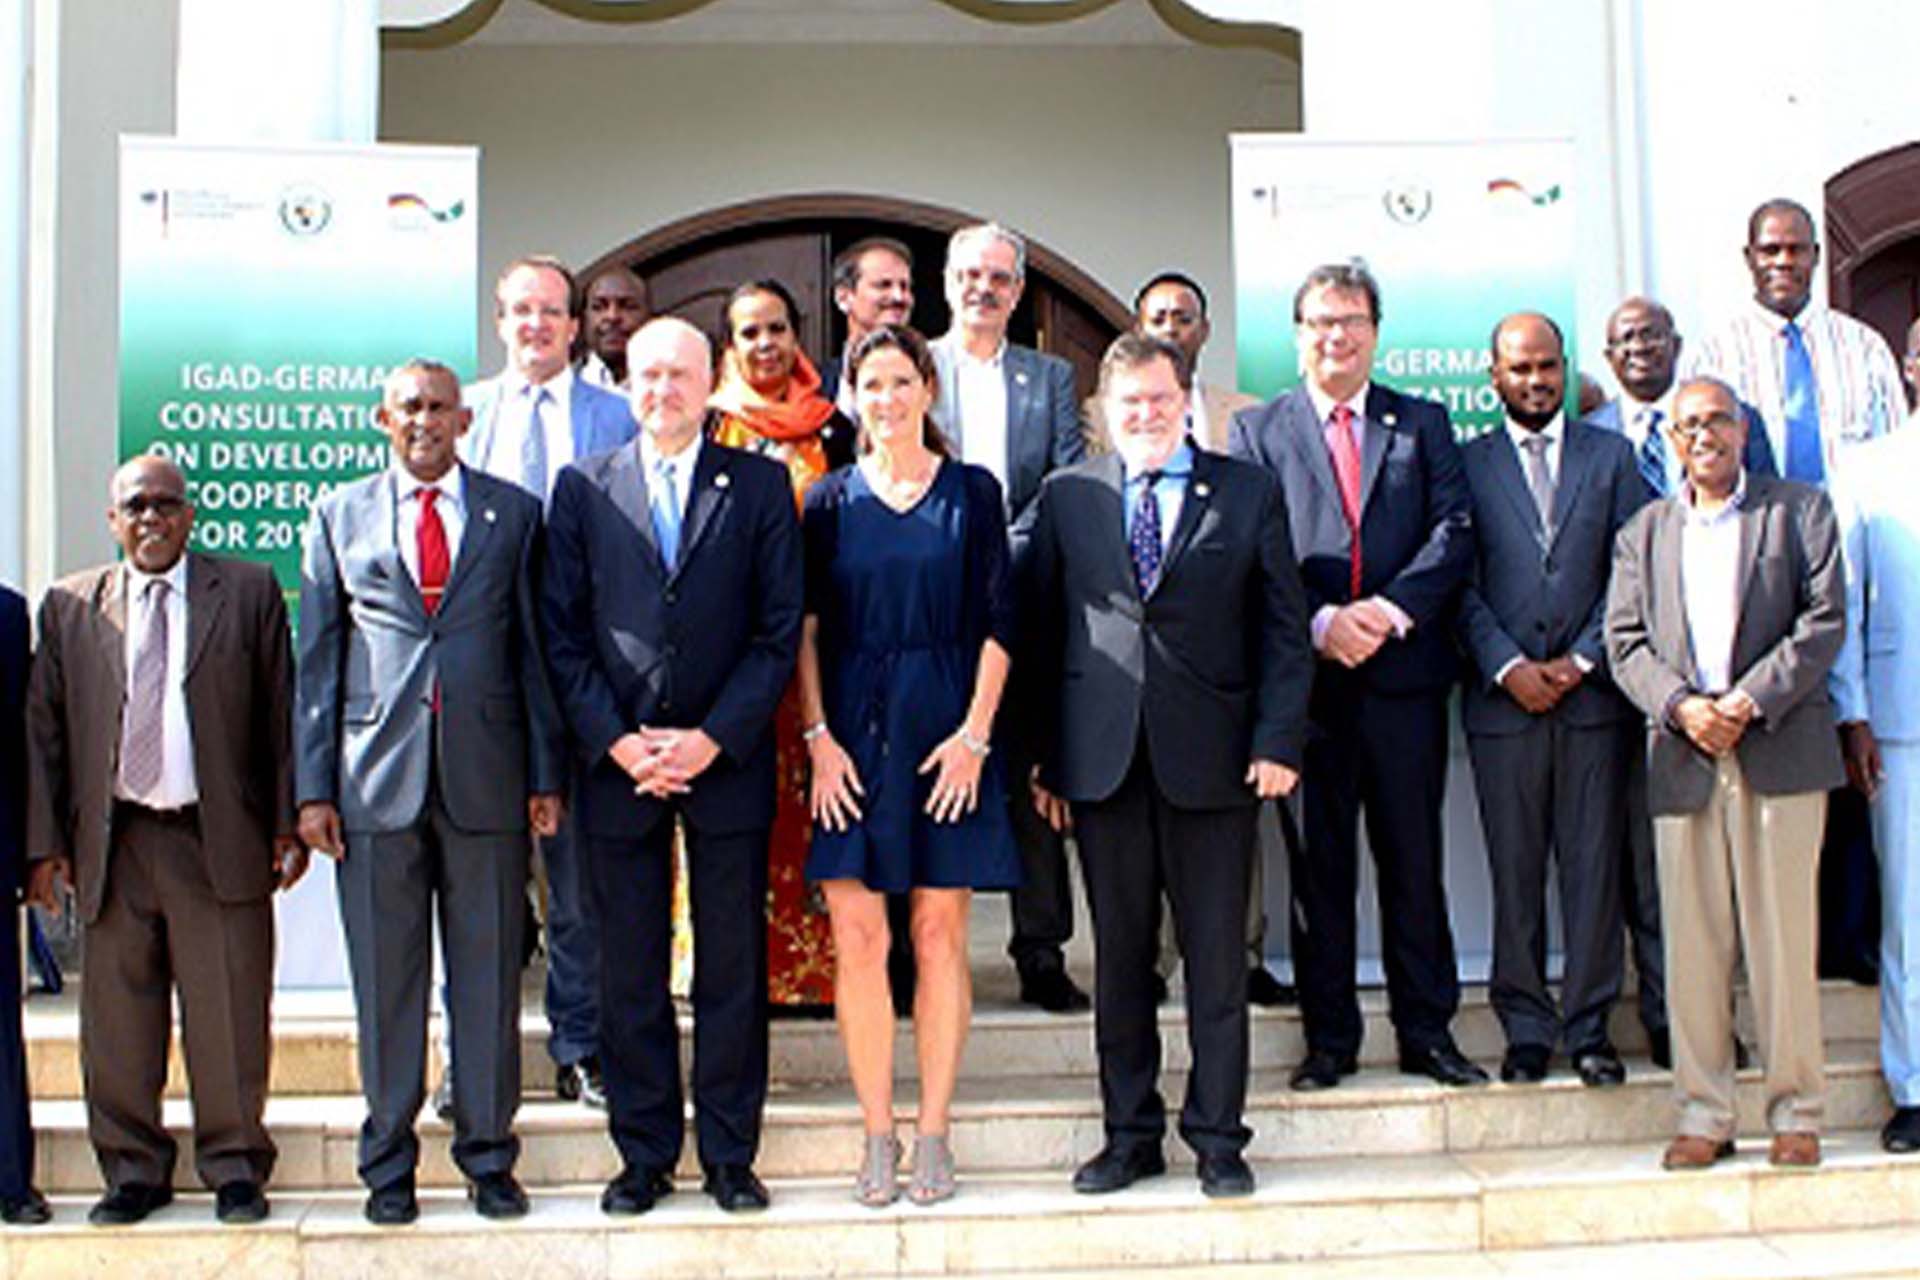 IGAD and Germany Consult on Development Cooperation